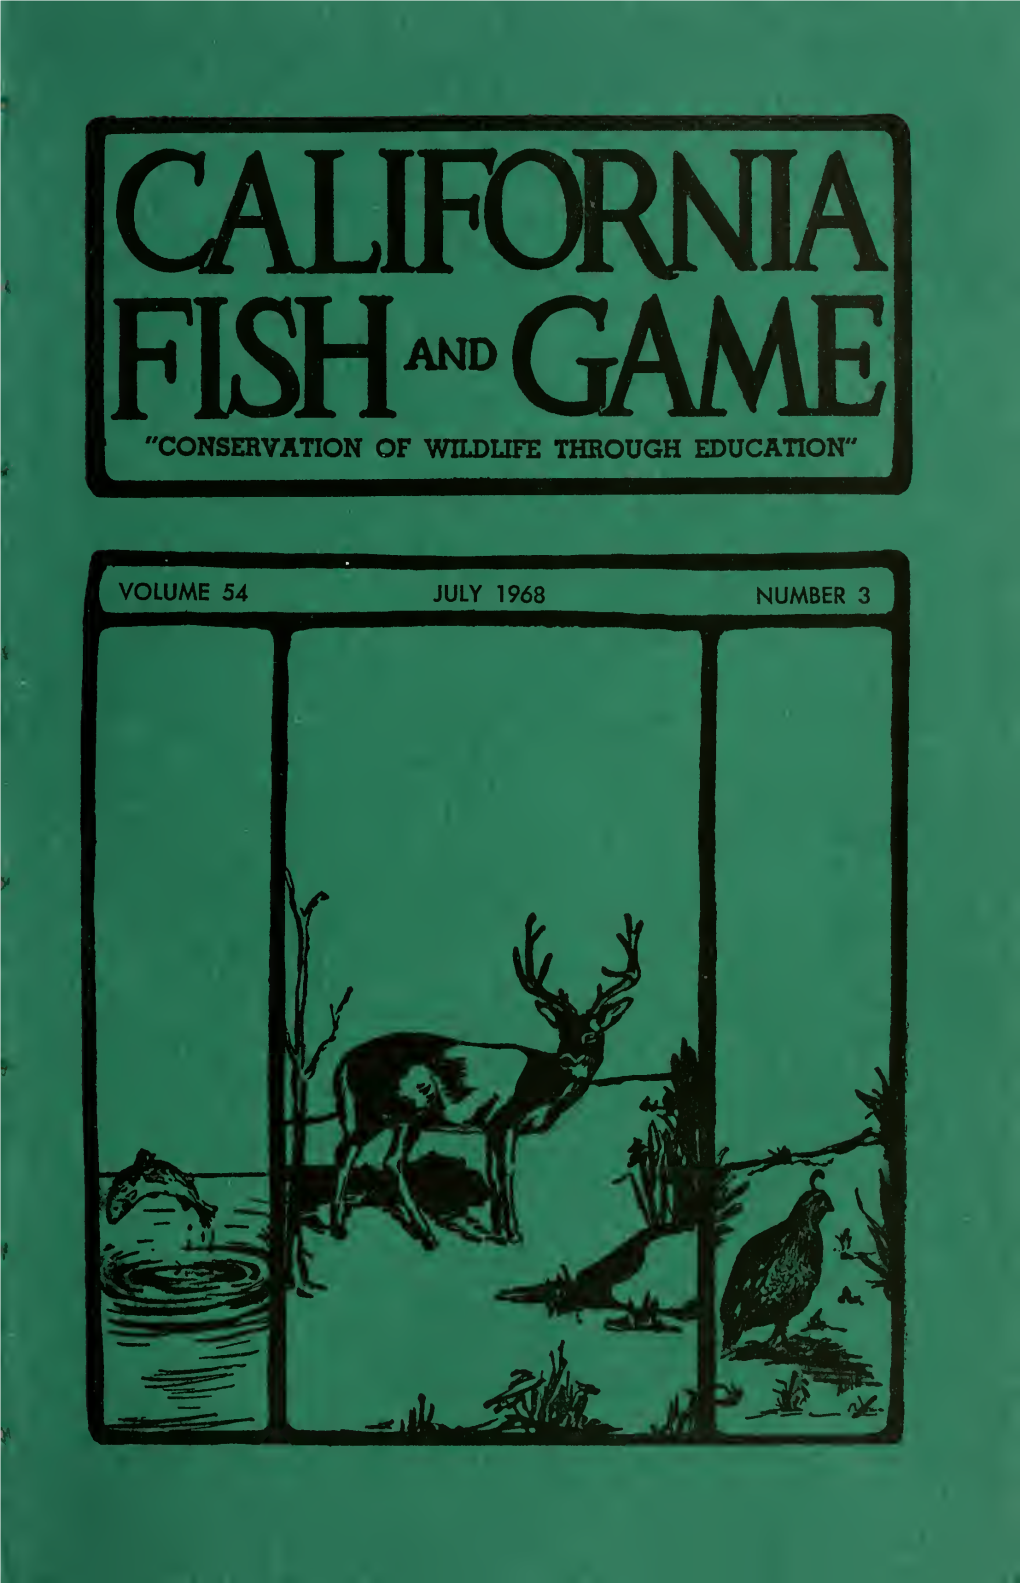 FKH^GAME "CONSERVATION of WILDLIFE THROUGH EDUCATION" California Fish and Game Is a Journal Devoted to the Conser- Vation of Wildlife